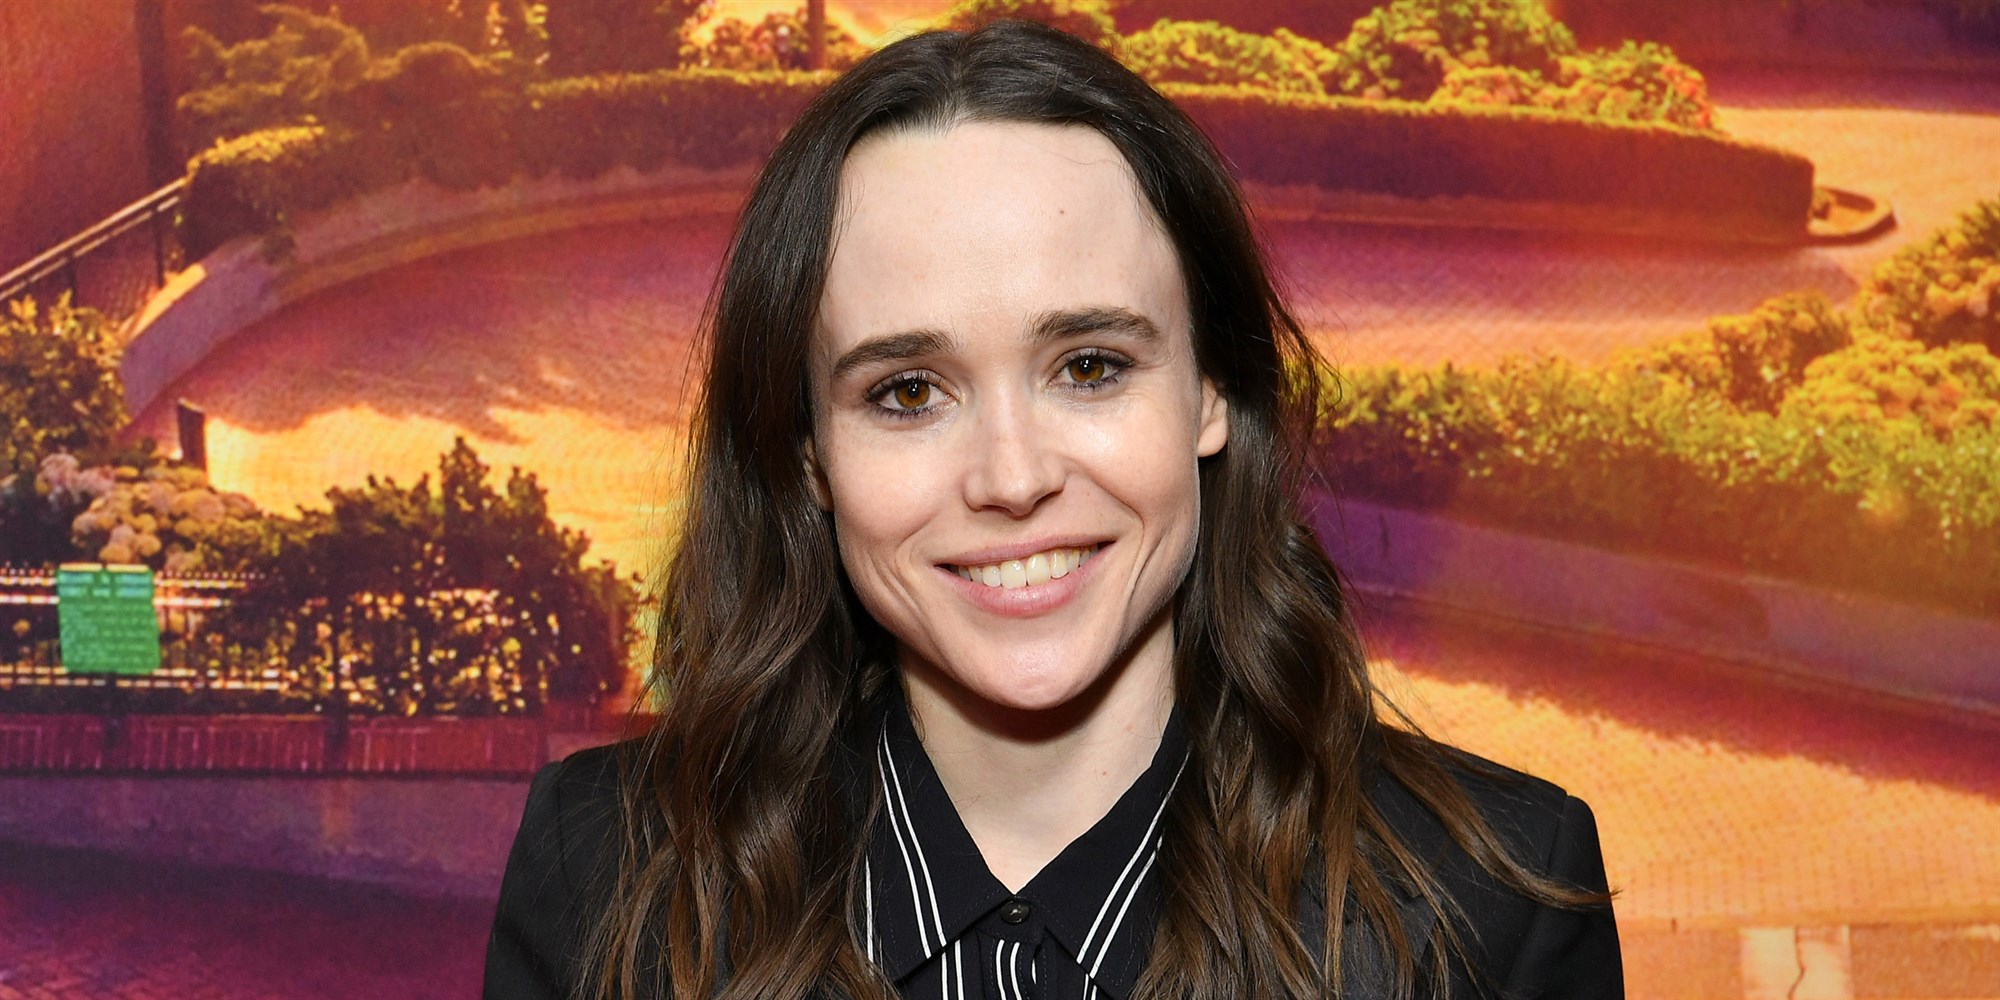 'Juno’ star Elliot Page, formerly Ellen Page, comes out as transgender